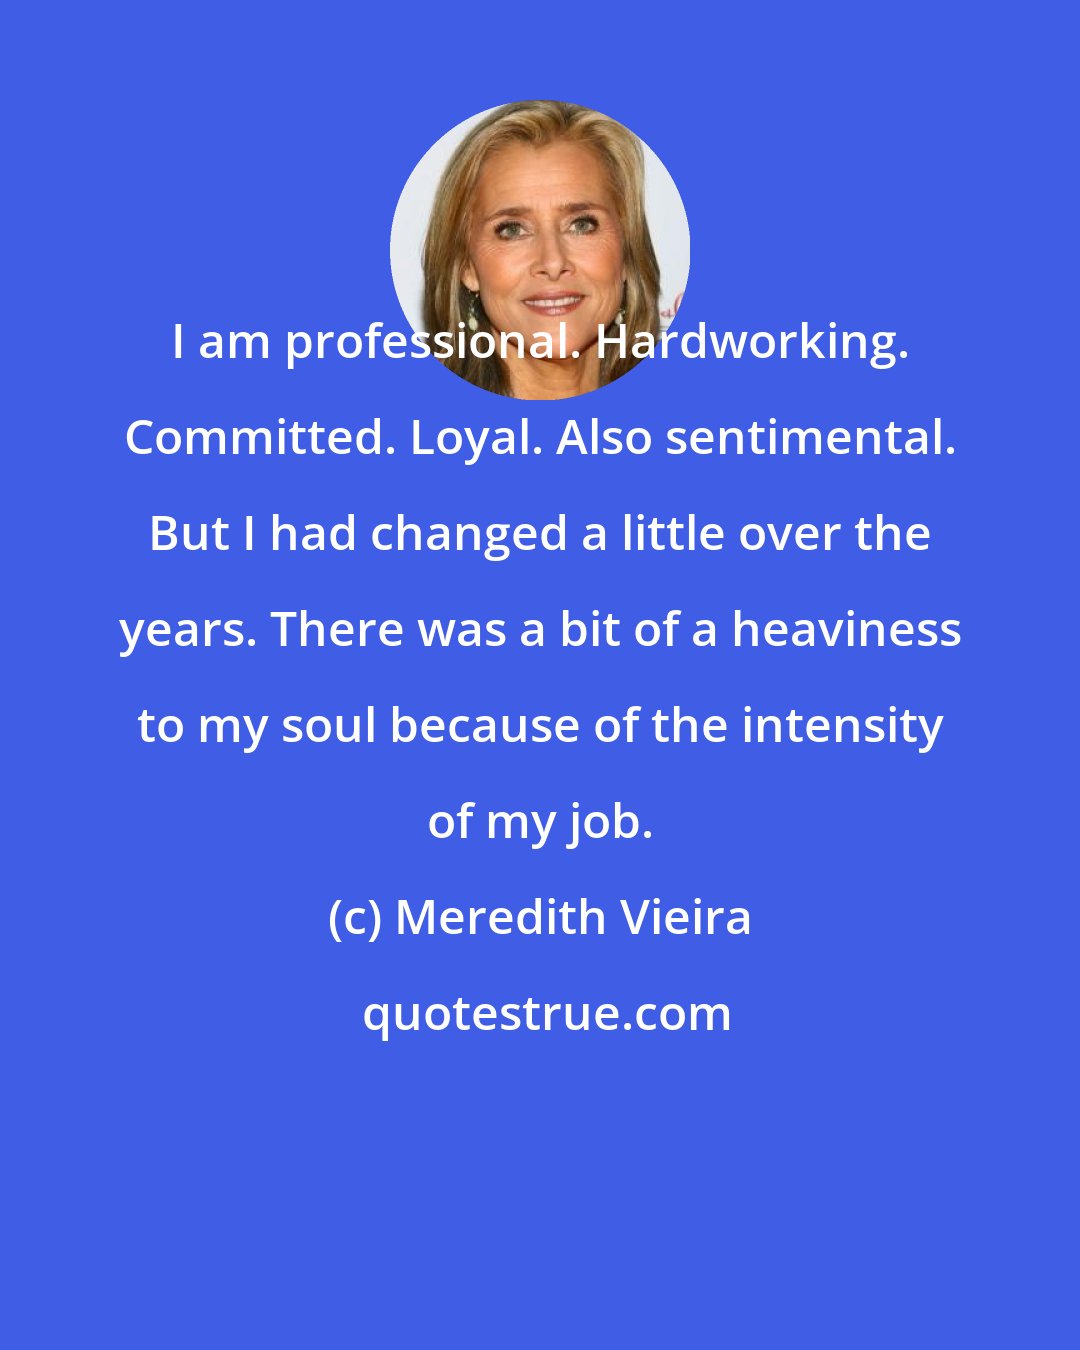 Meredith Vieira: I am professional. Hardworking. Committed. Loyal. Also sentimental. But I had changed a little over the years. There was a bit of a heaviness to my soul because of the intensity of my job.